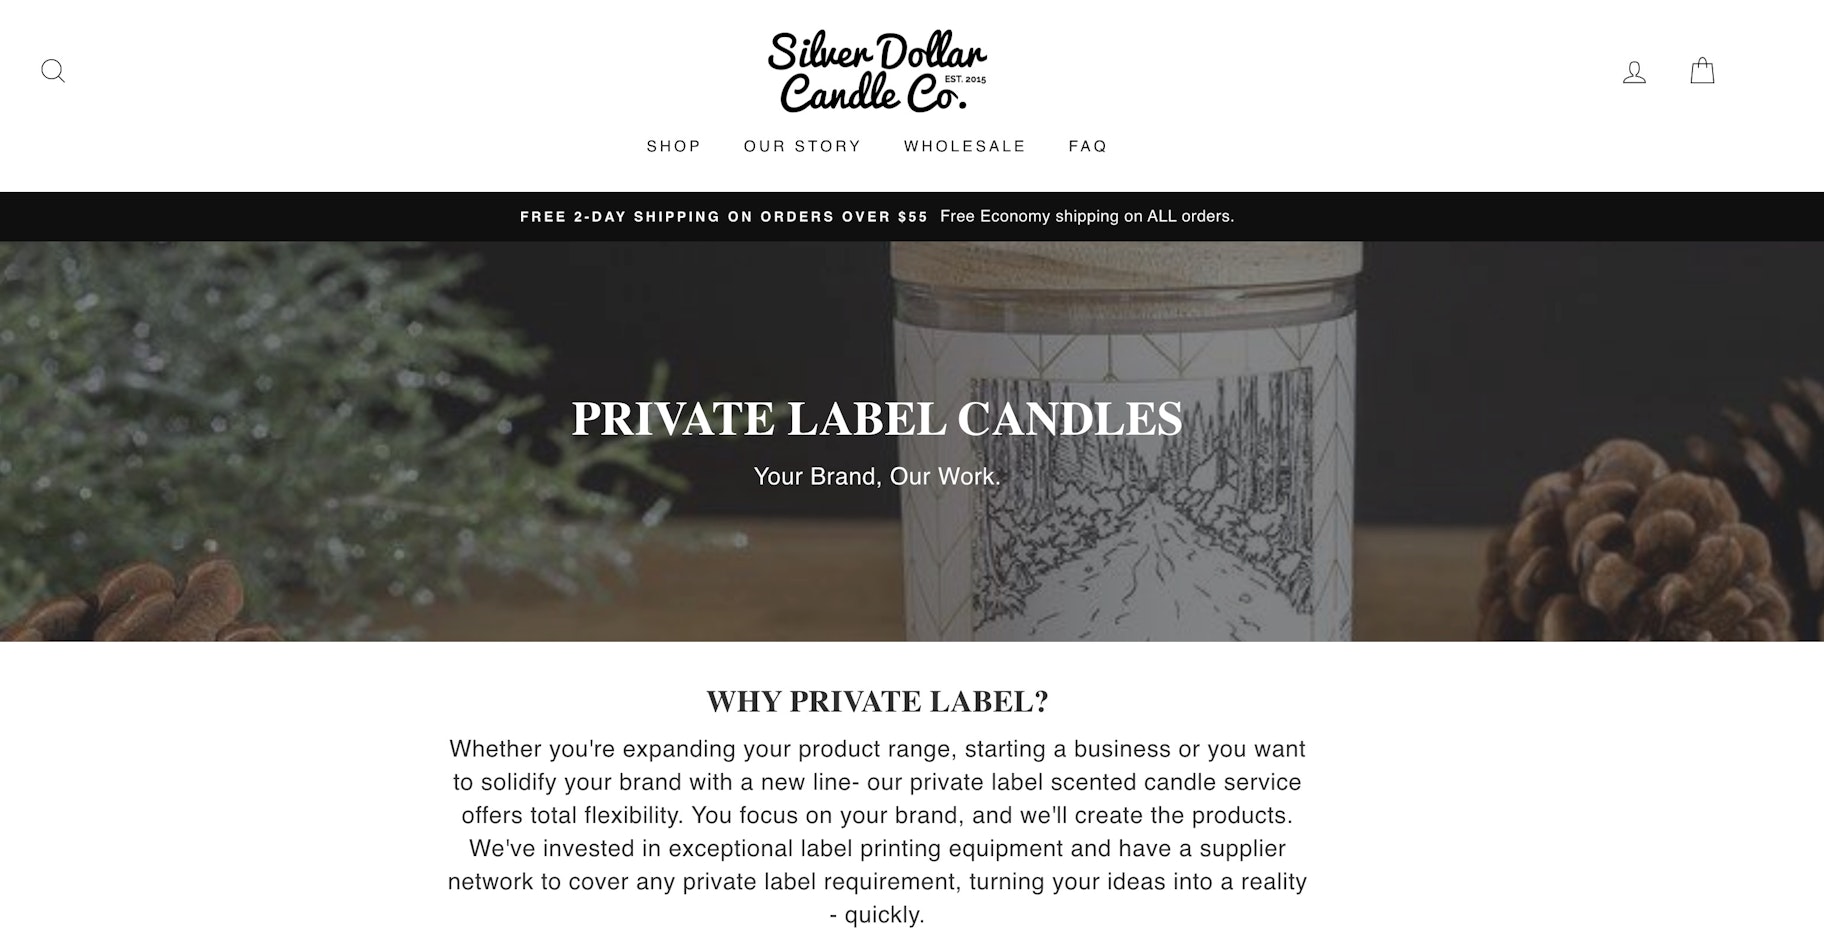 private label candle manufacturer: silver dollar candle co.